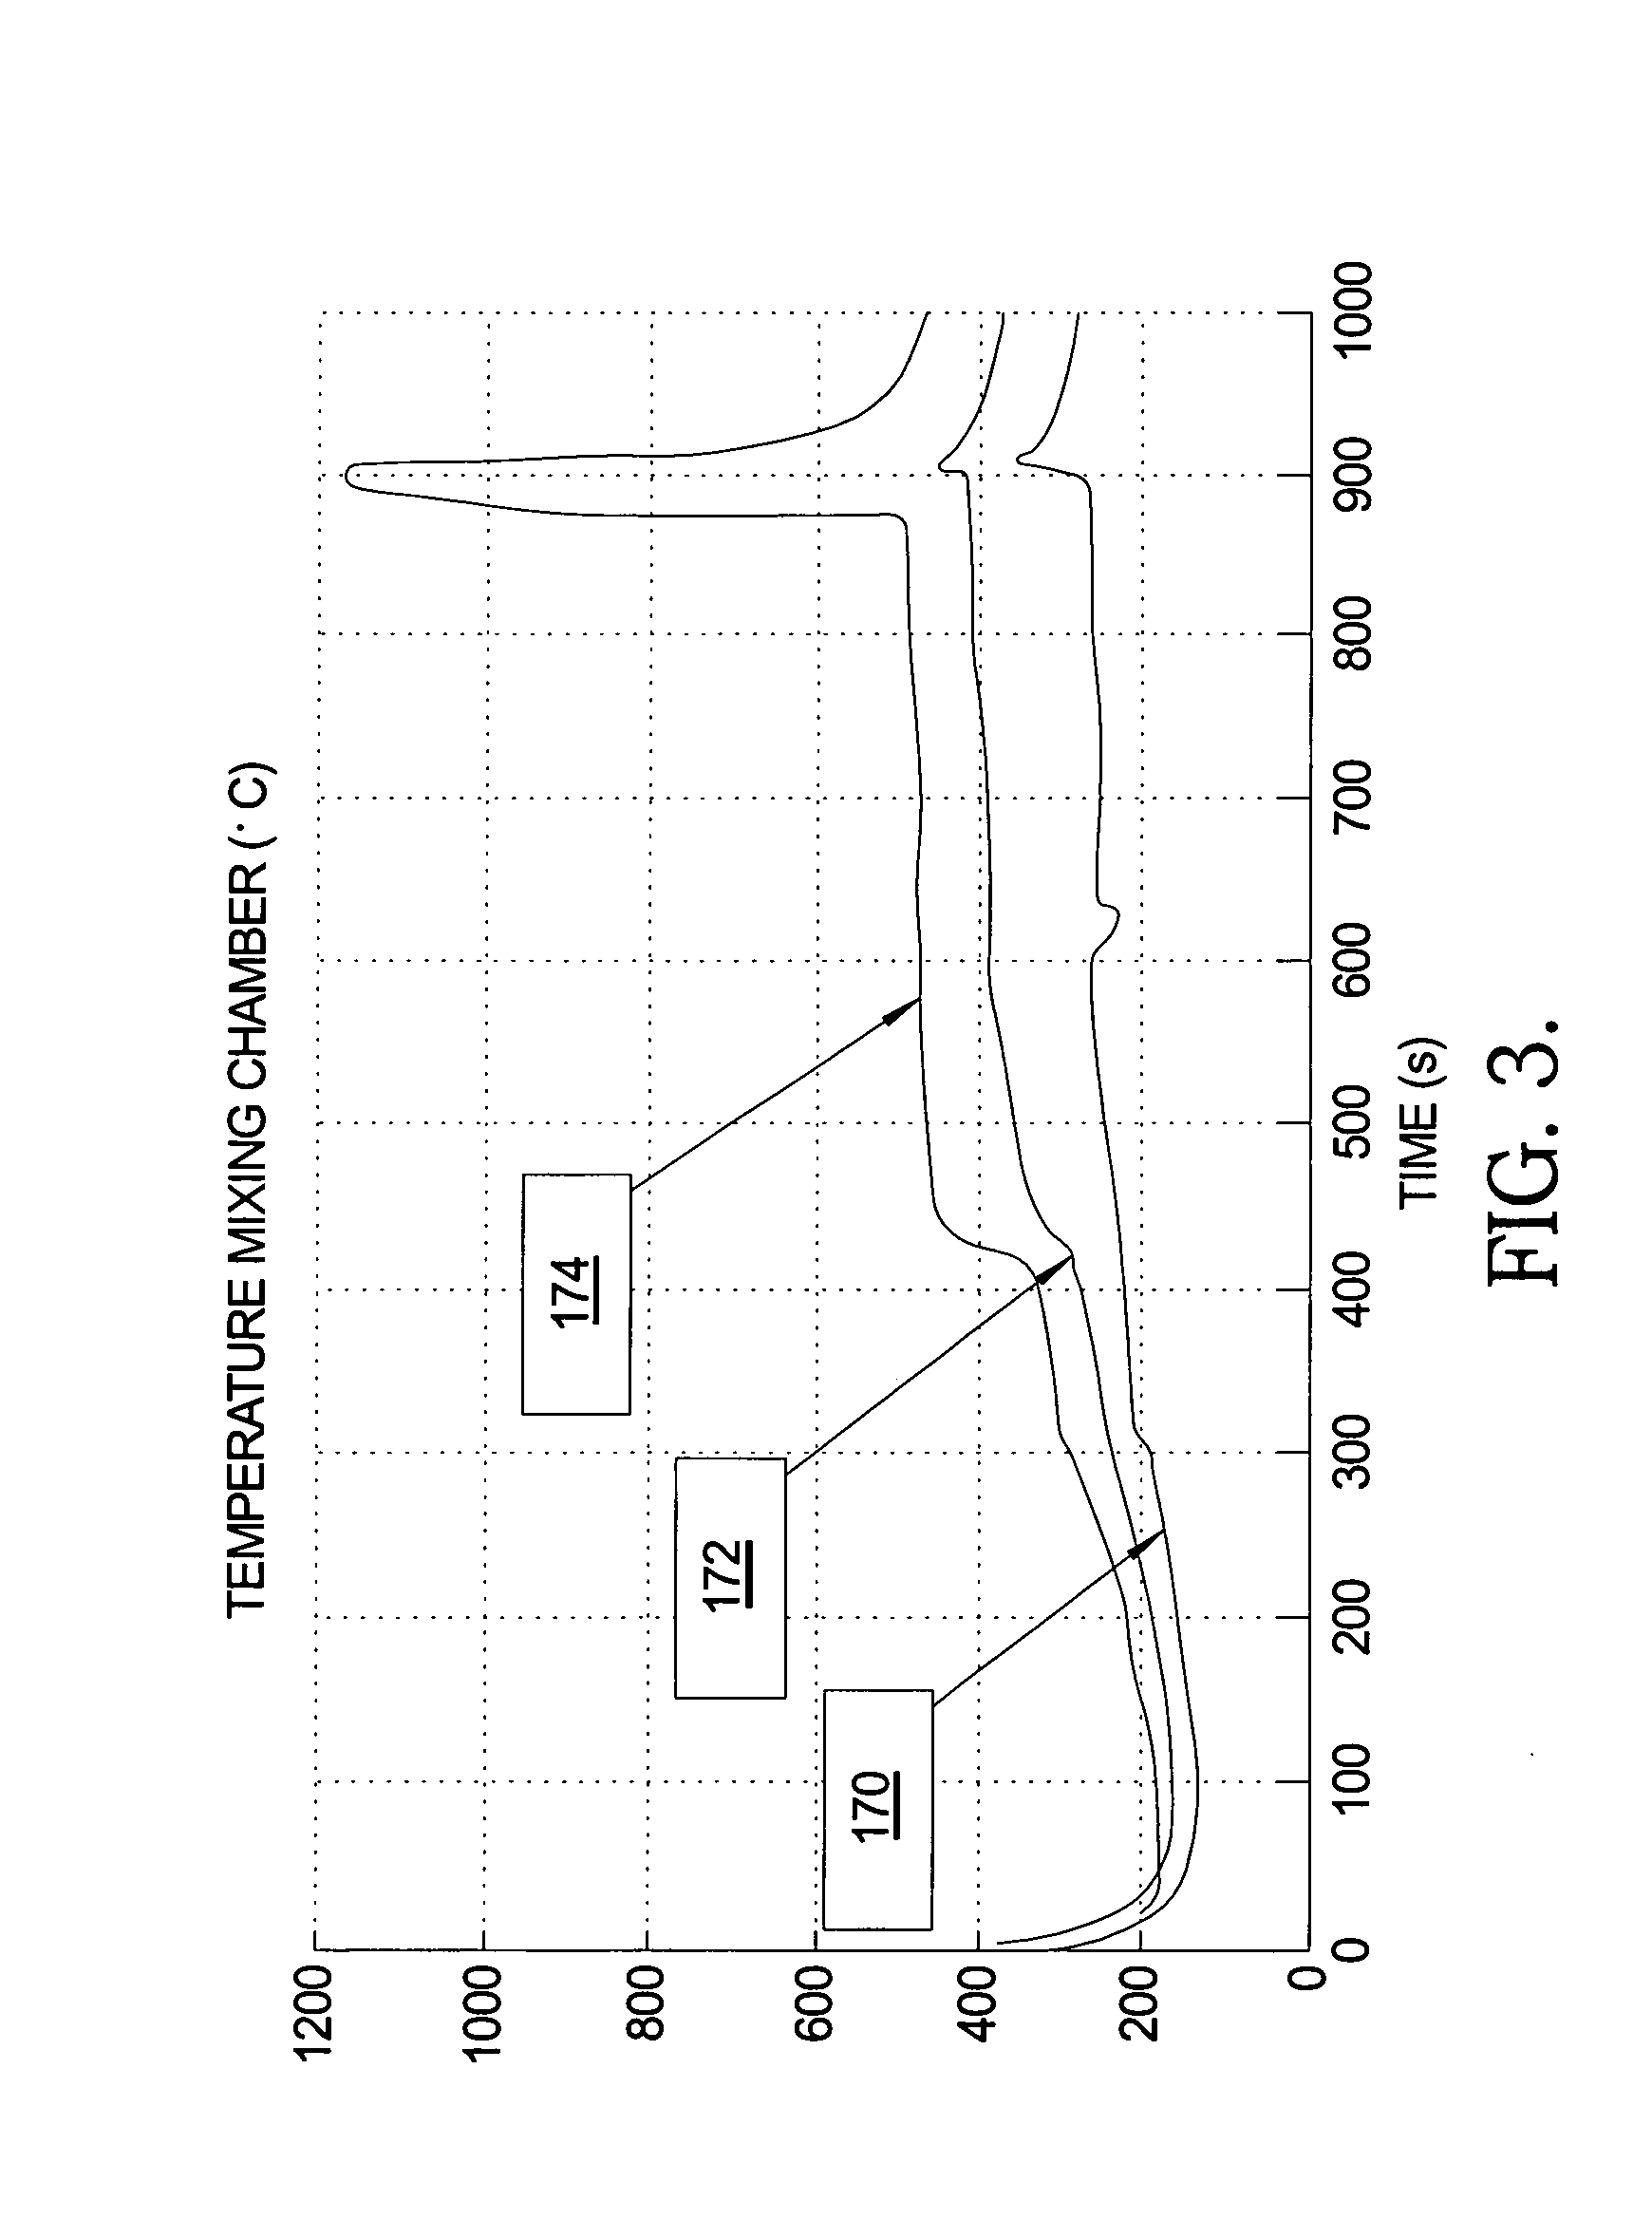 Fuel cell hydrocarbon reformer having rapid transient response and convective cooling